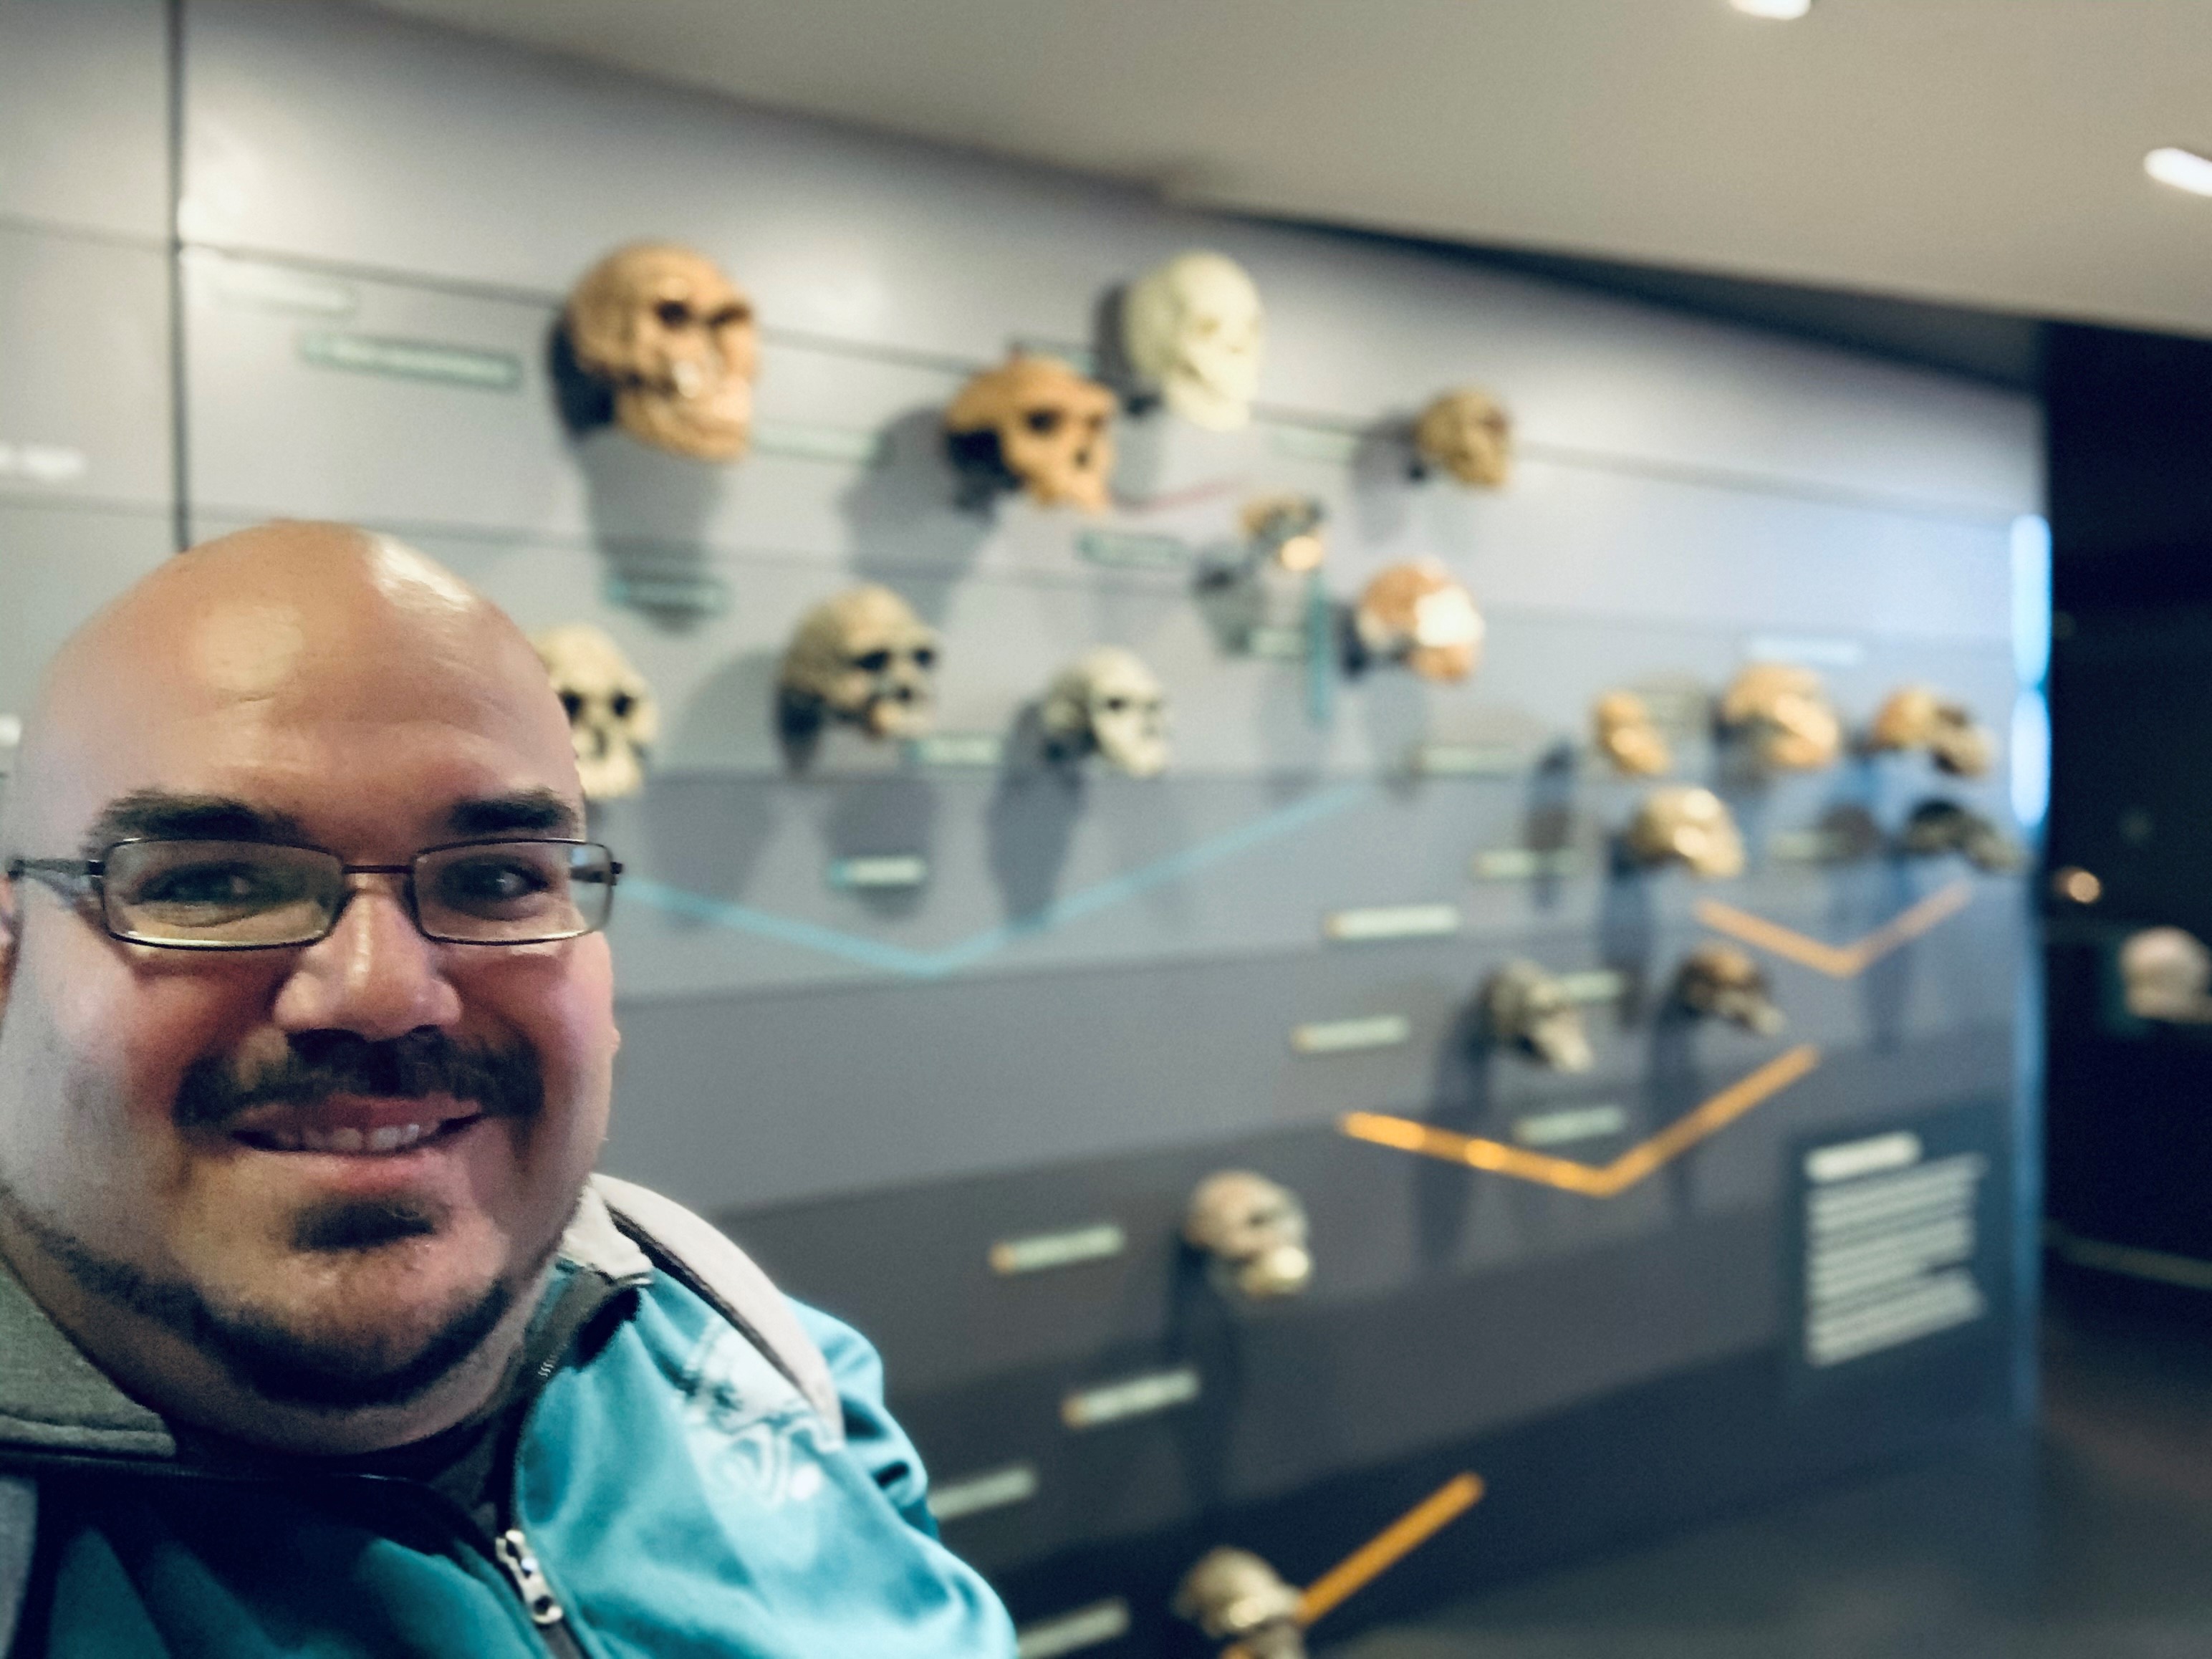 Dr Garcia with museum display of early human skulls